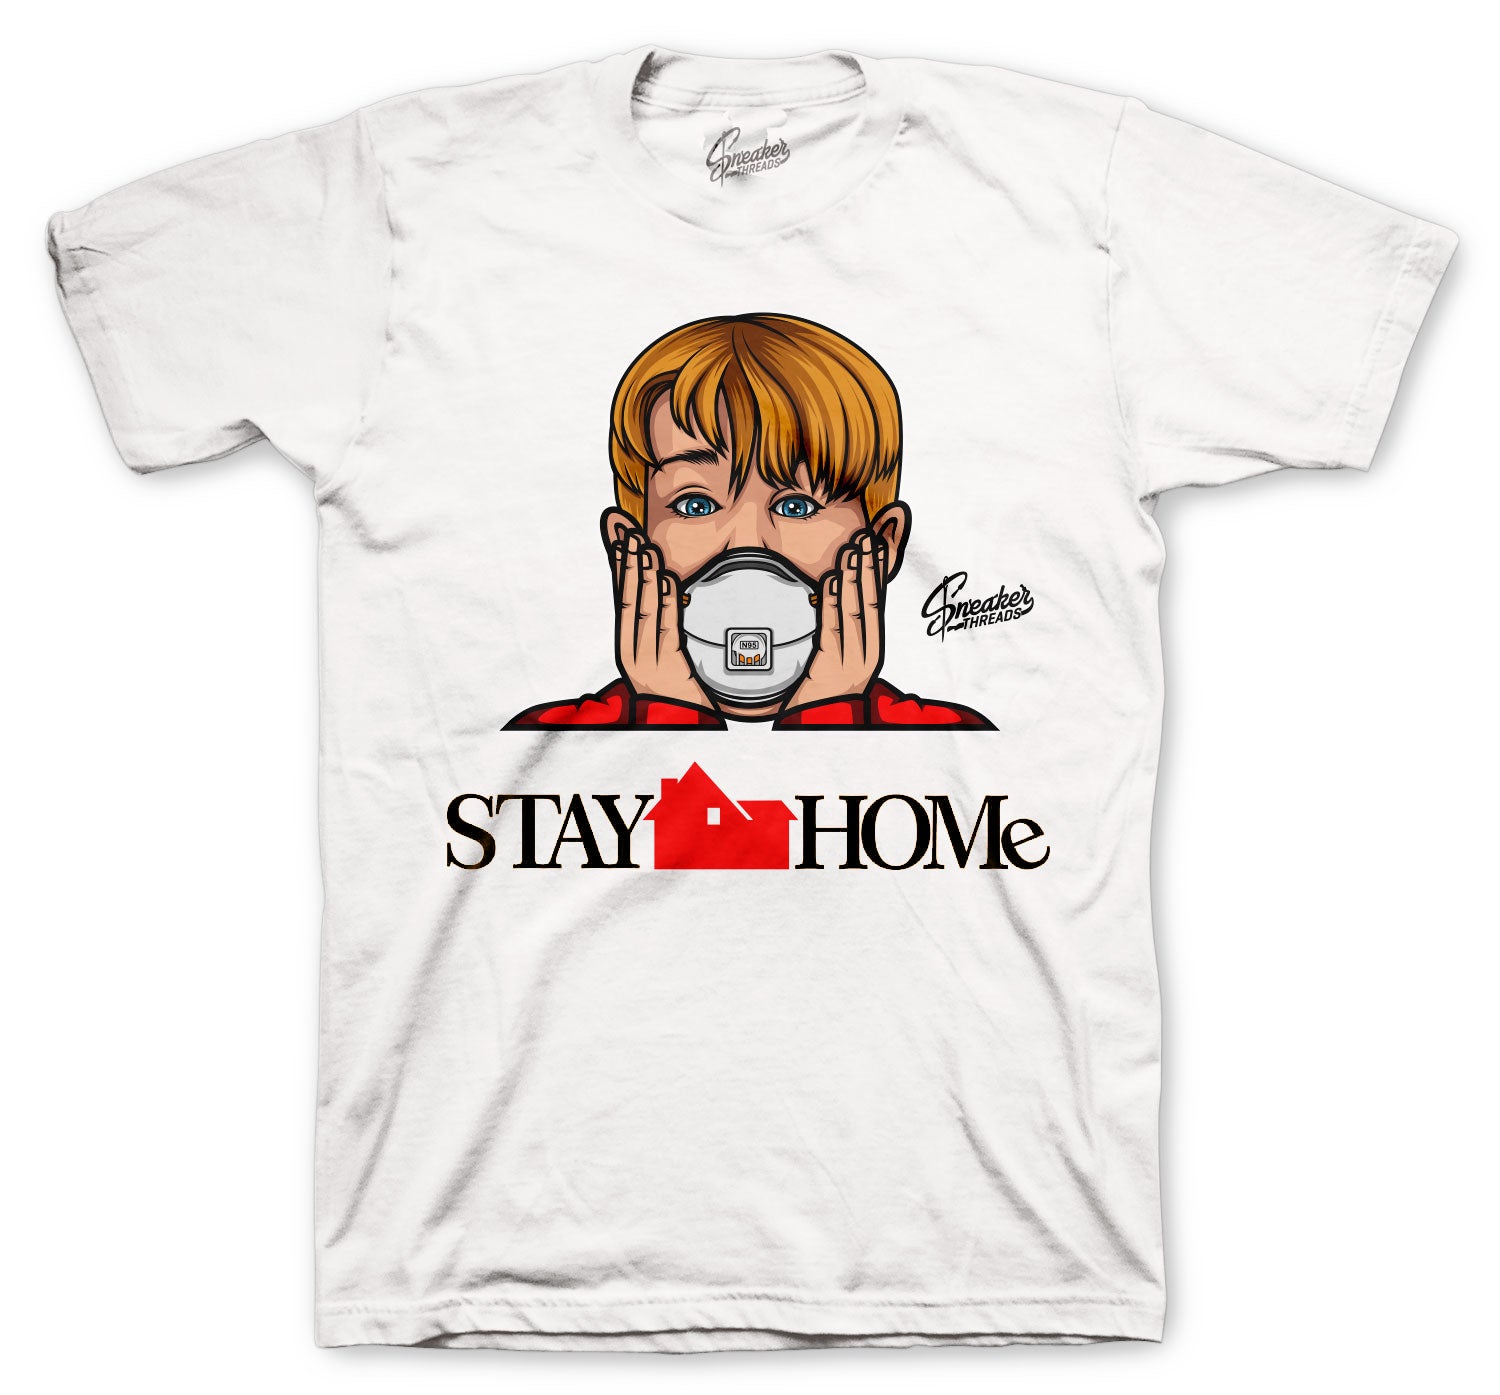 Retro 5 Fire Red Shirt - Stay Home - White